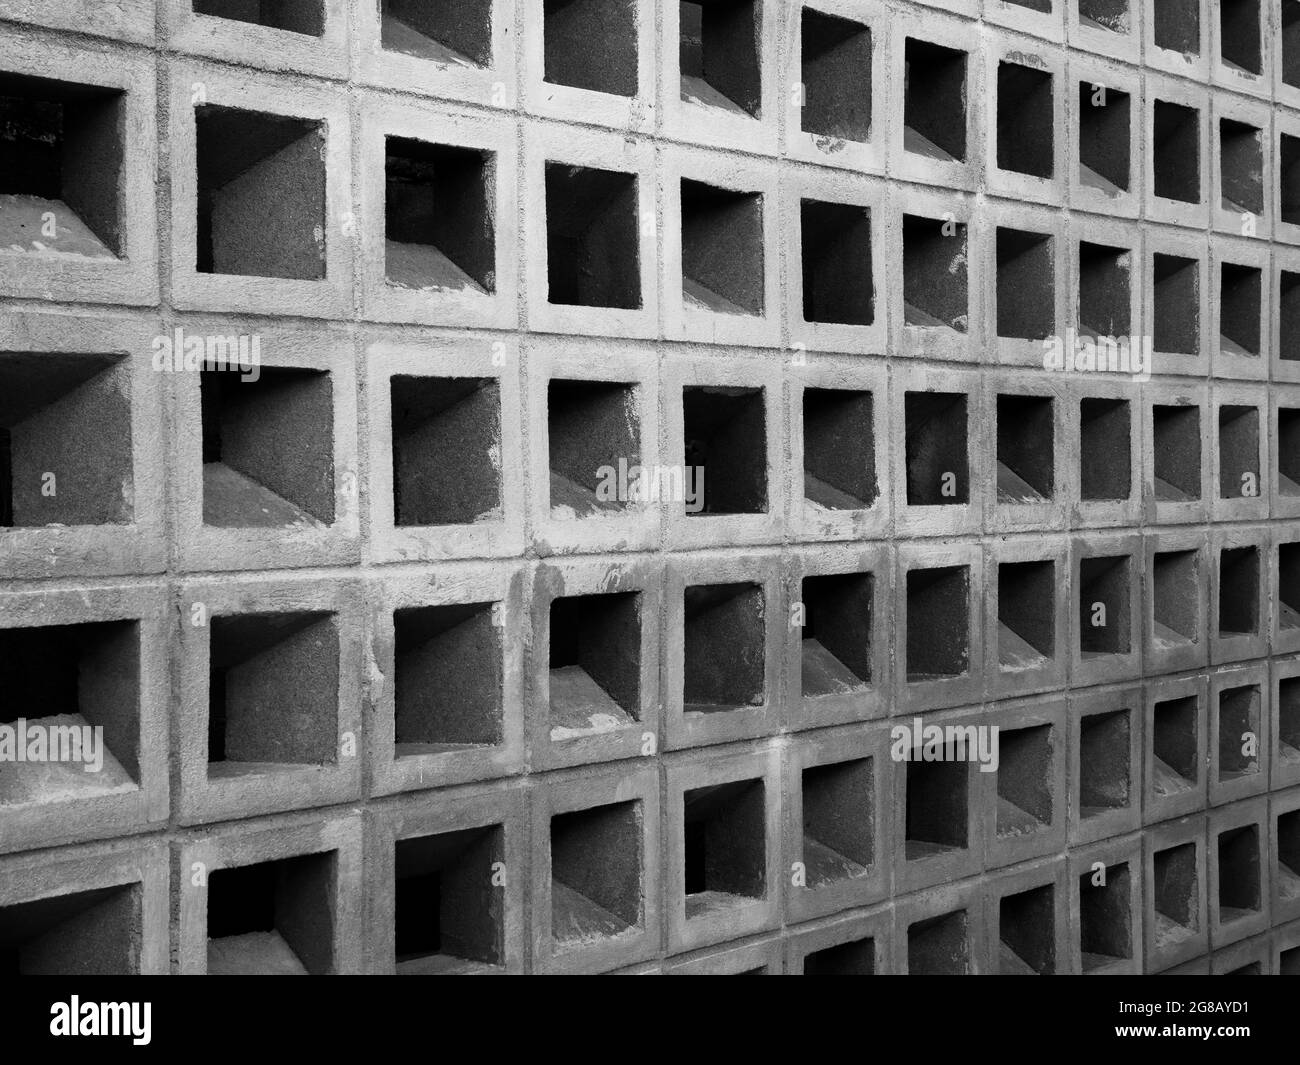 Square concrete block pattern, wall background. Light weight hollow brick block wall structure made from cement. Stock Photo